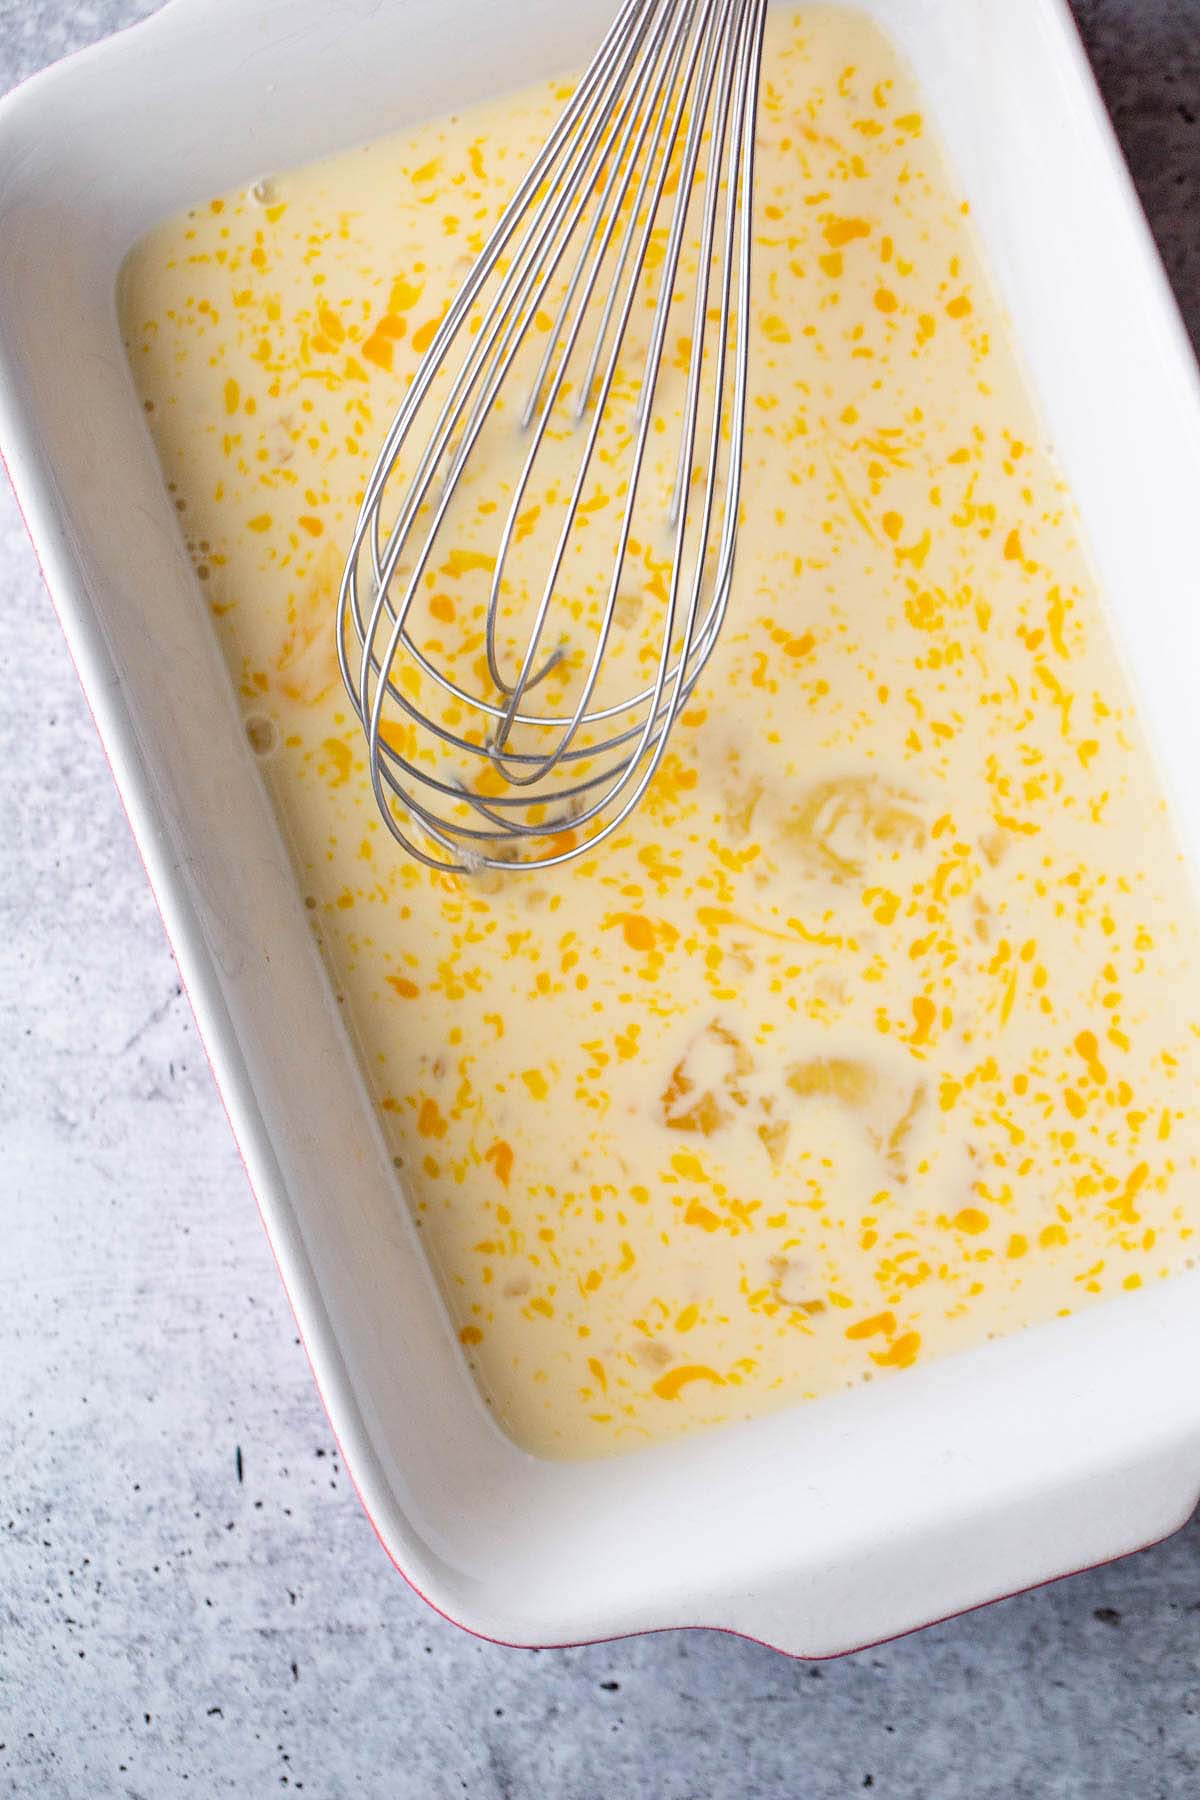 Eggs whisked with milk.